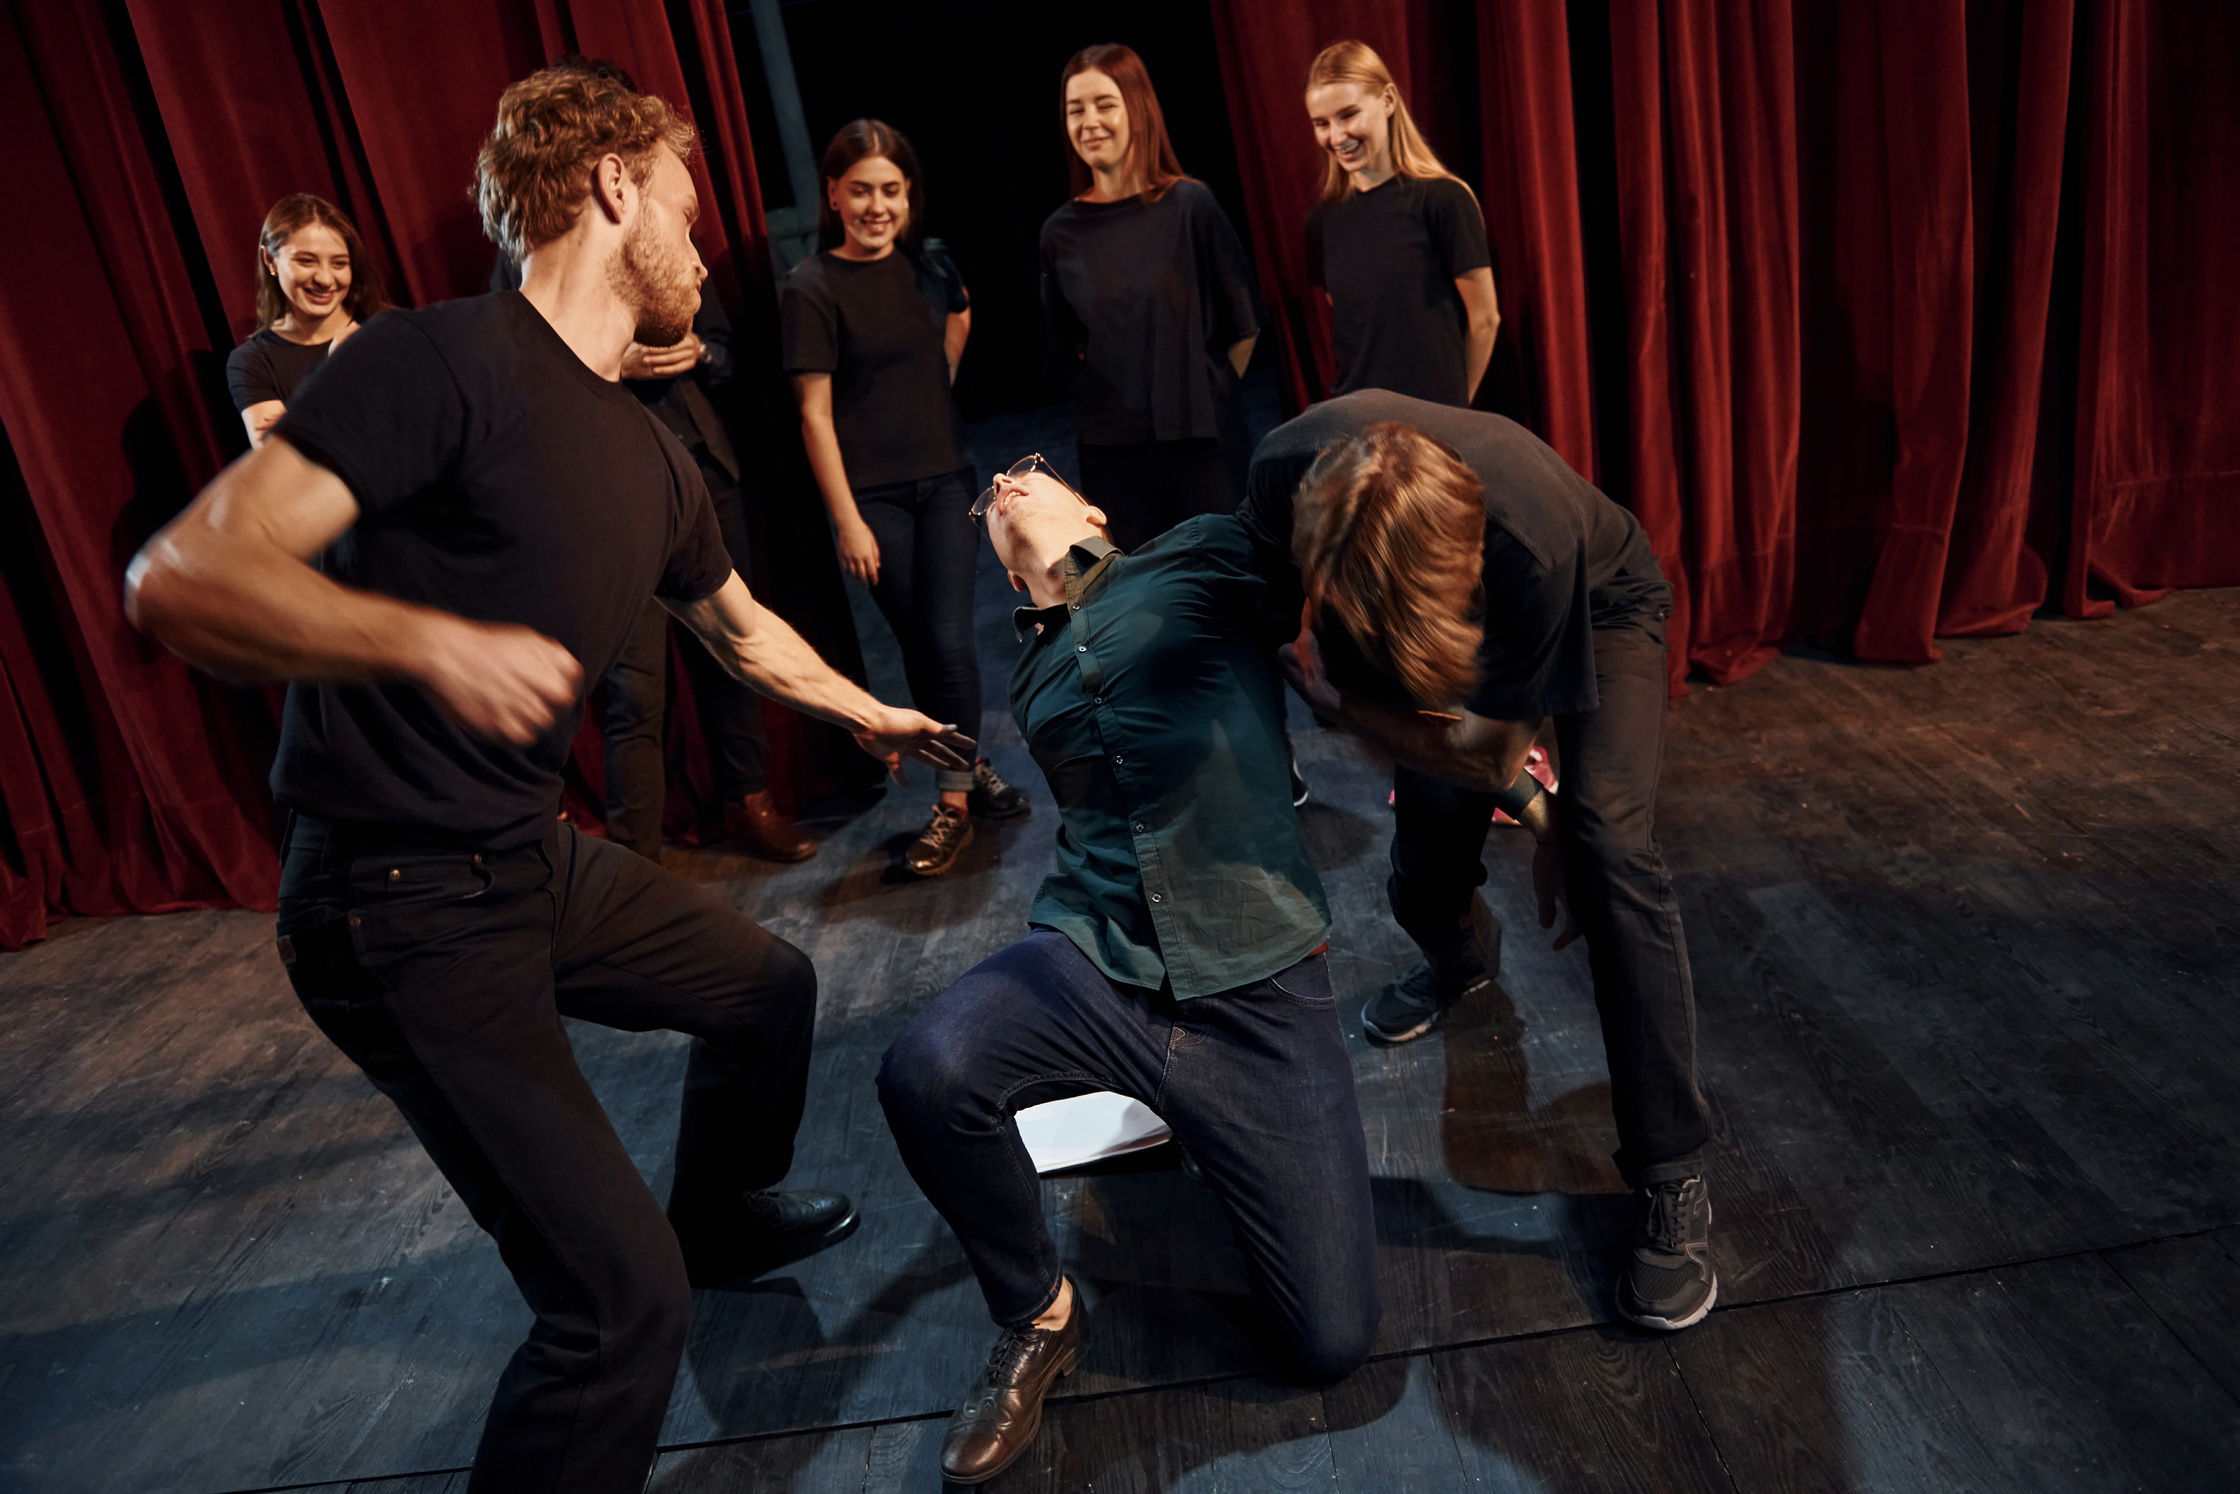 Fight Scene. Group of Actors in Dark Colored Clothes on Rehearsal in the Theater